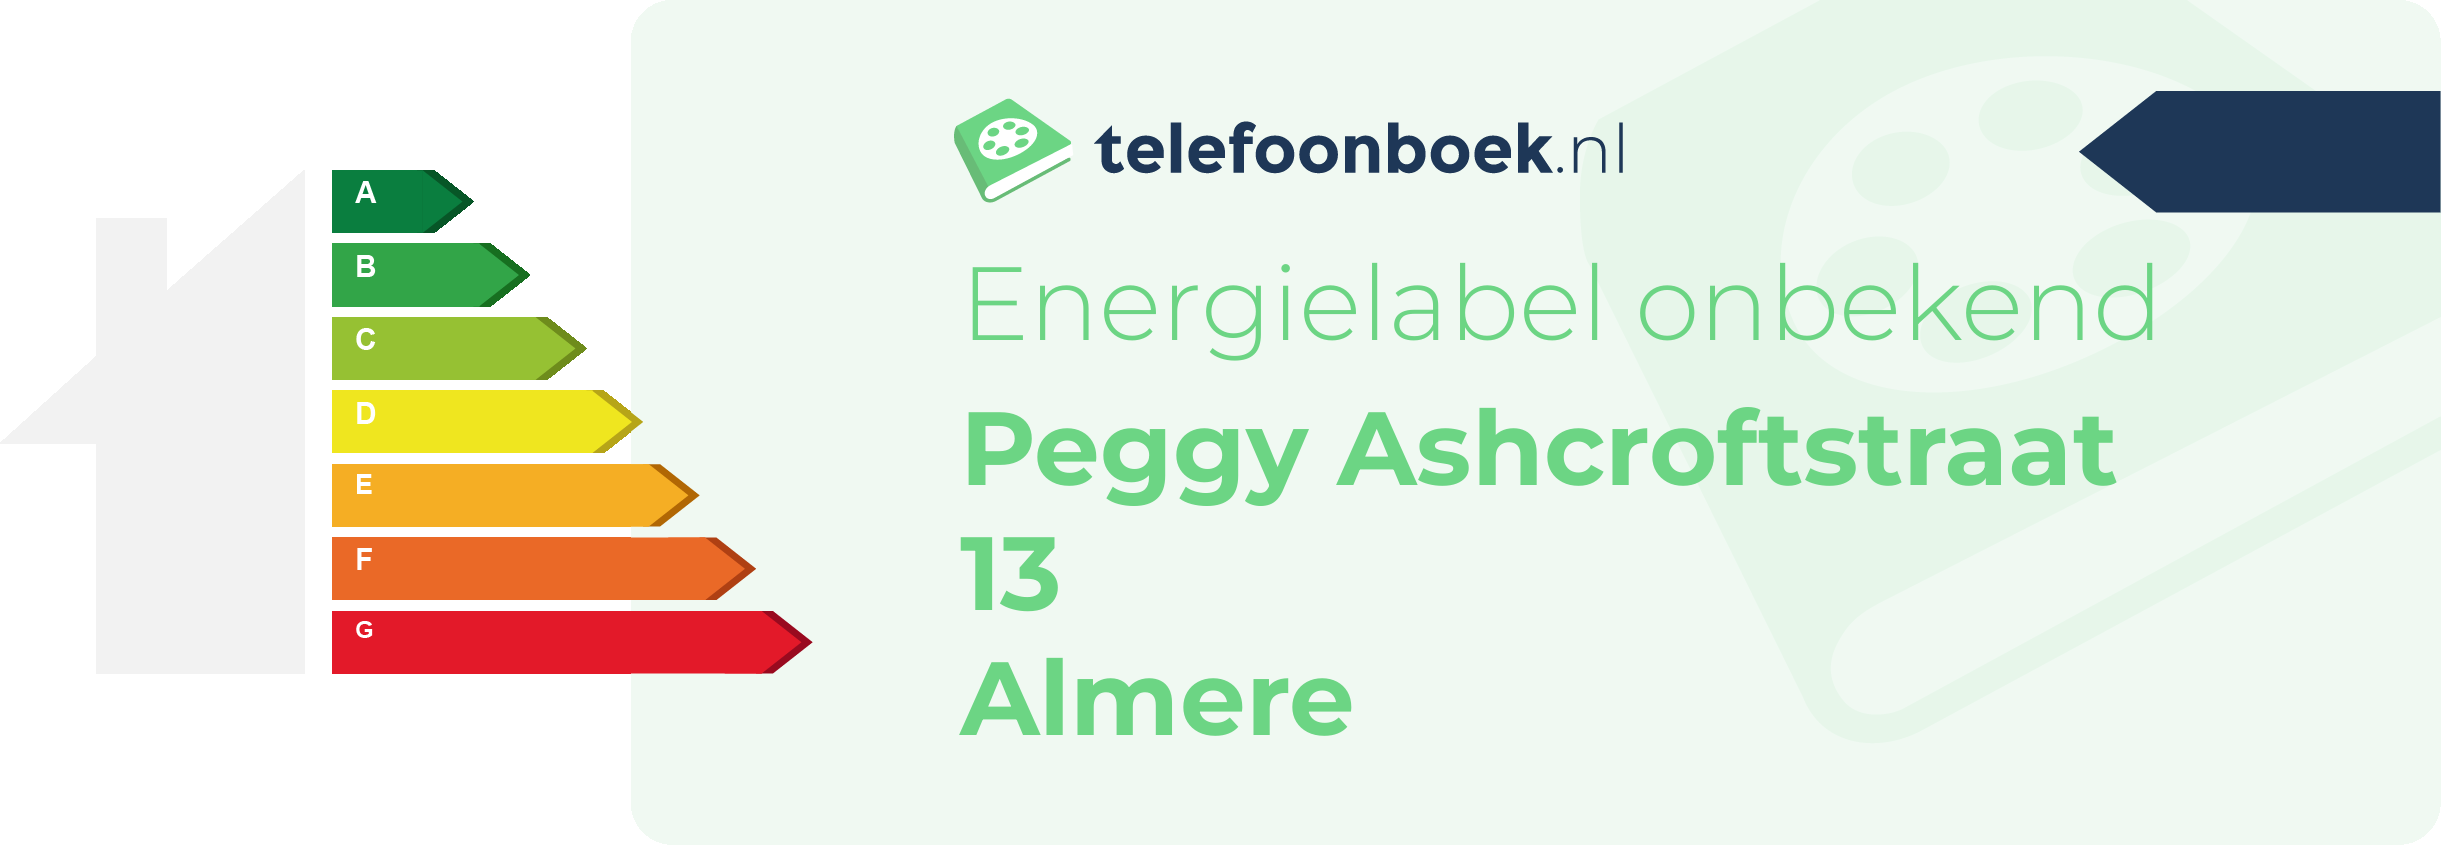 Energielabel Peggy Ashcroftstraat 13 Almere